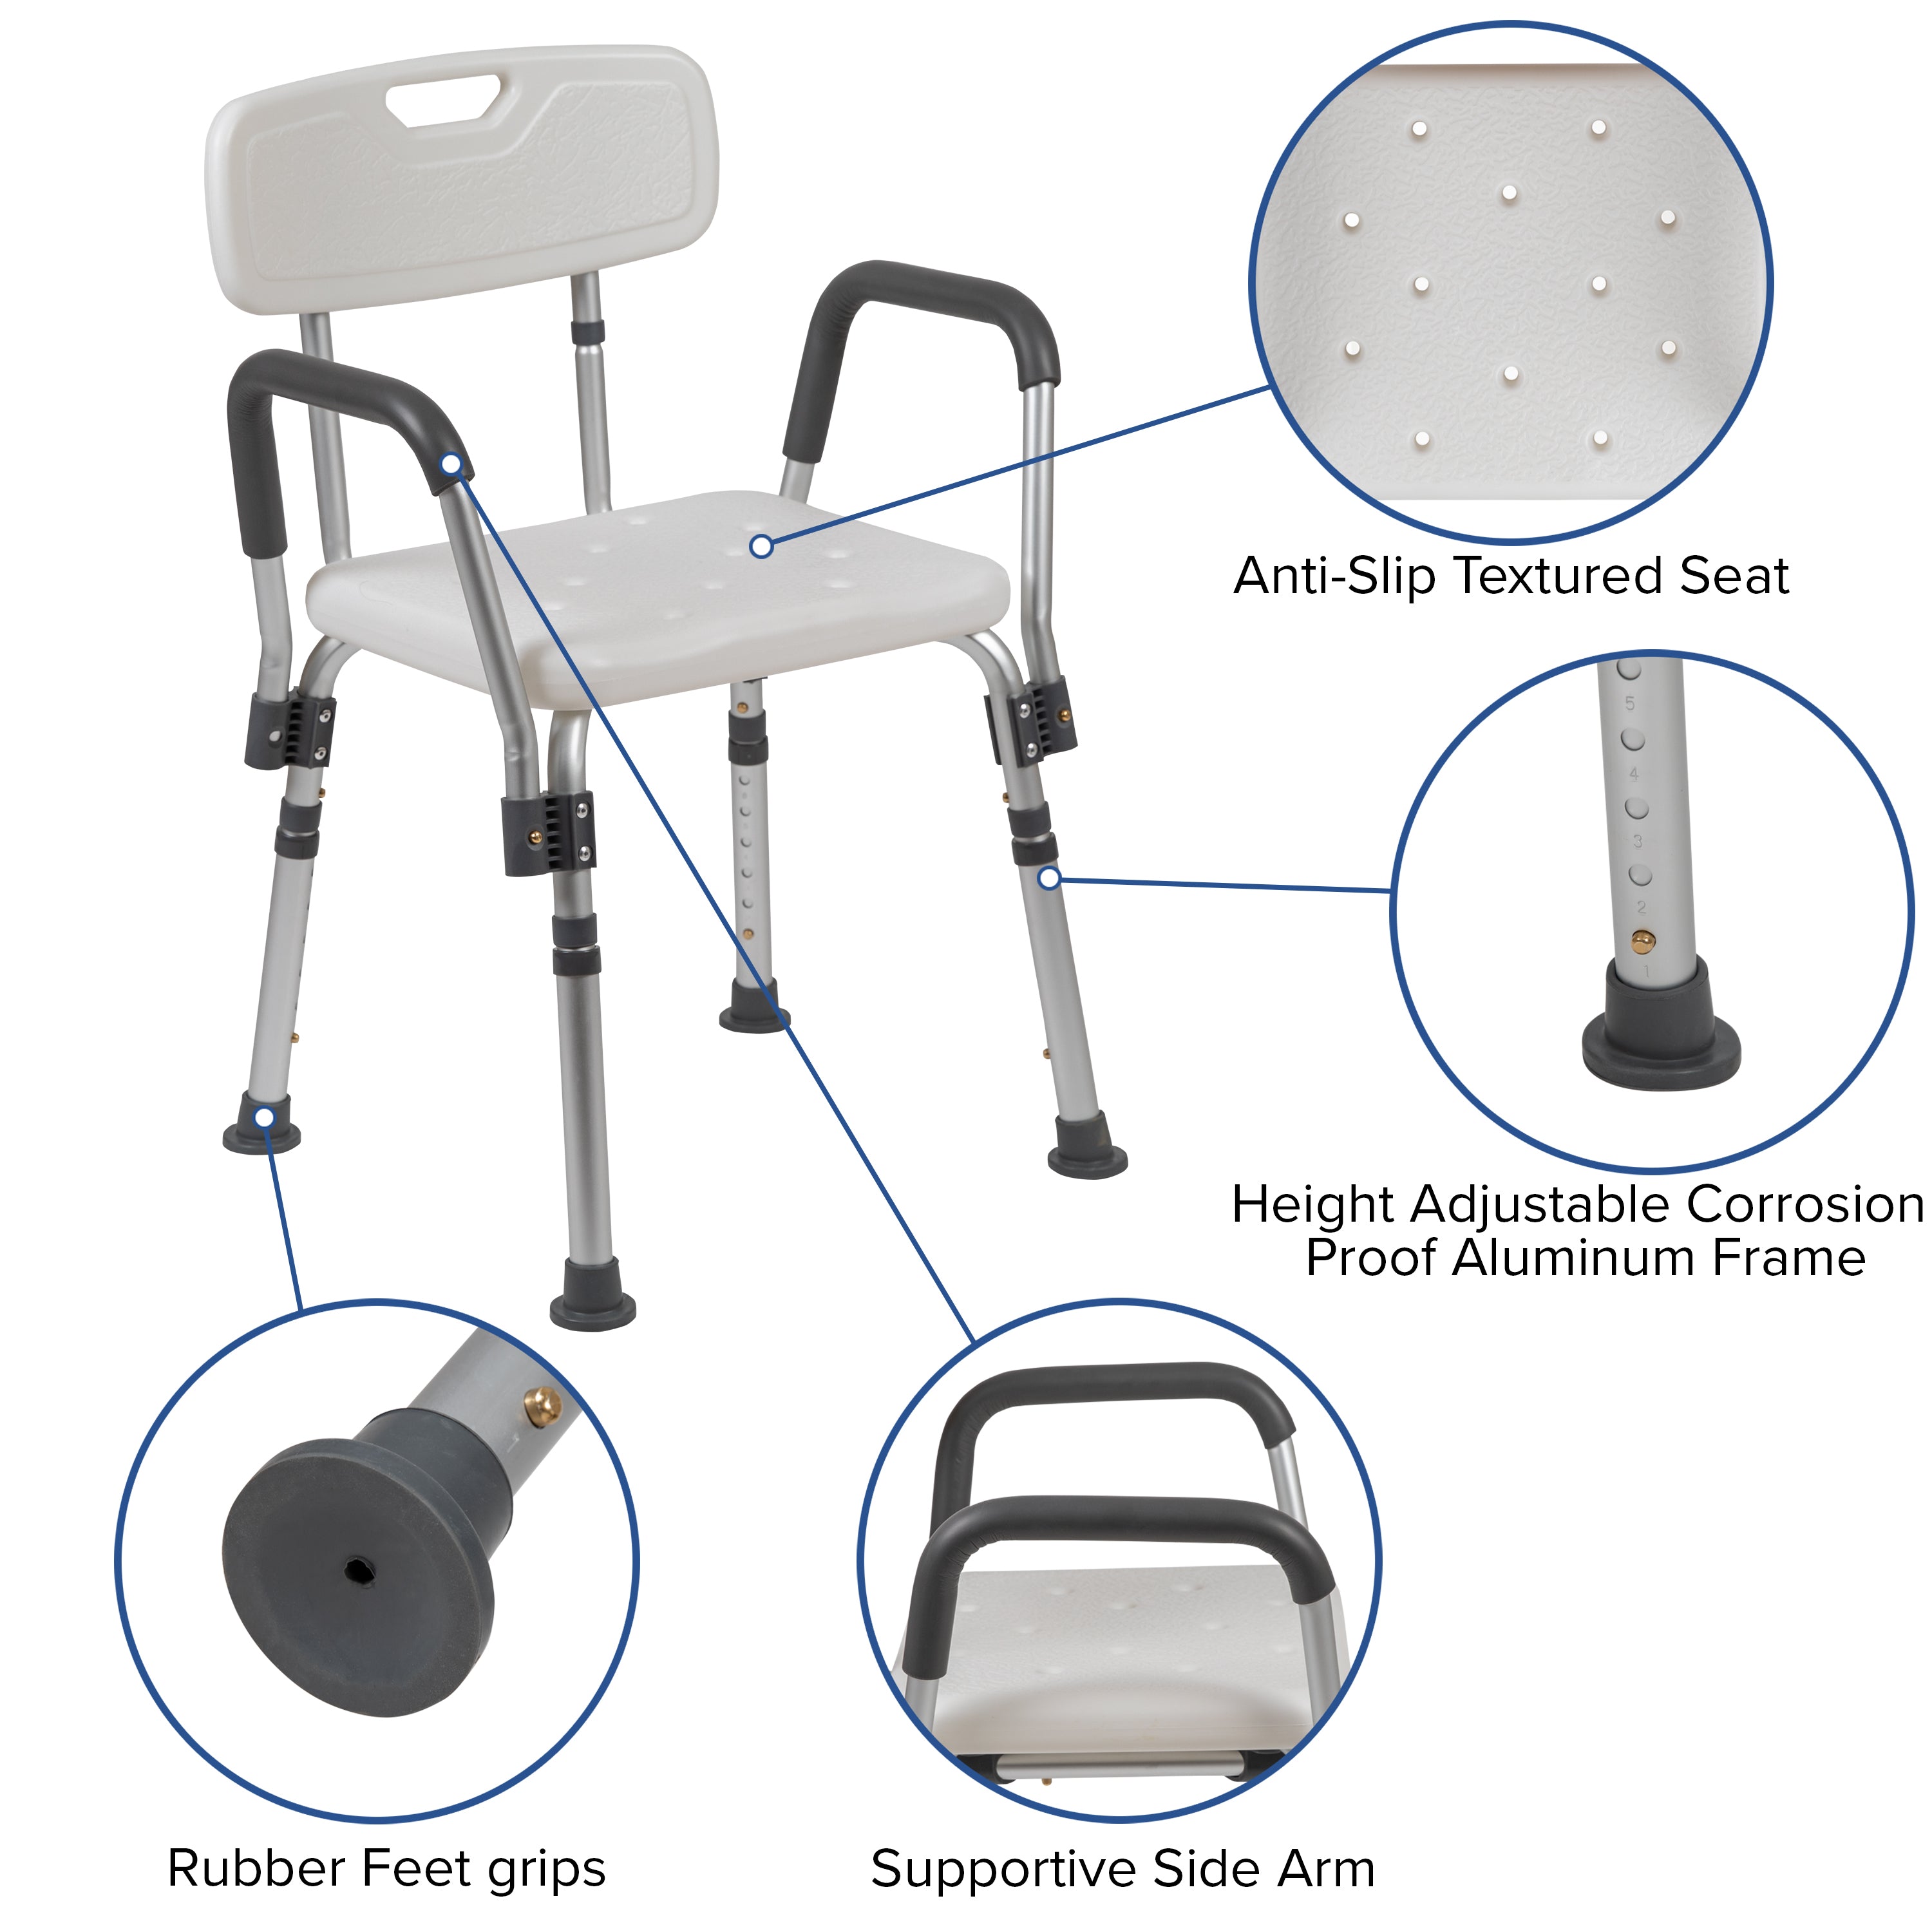 HERCULES Series 300 Lb. Capacity Adjustable Bath & Shower Chair with Quick Release Back & Arms-Bath Safety-Flash Furniture-Wall2Wall Furnishings